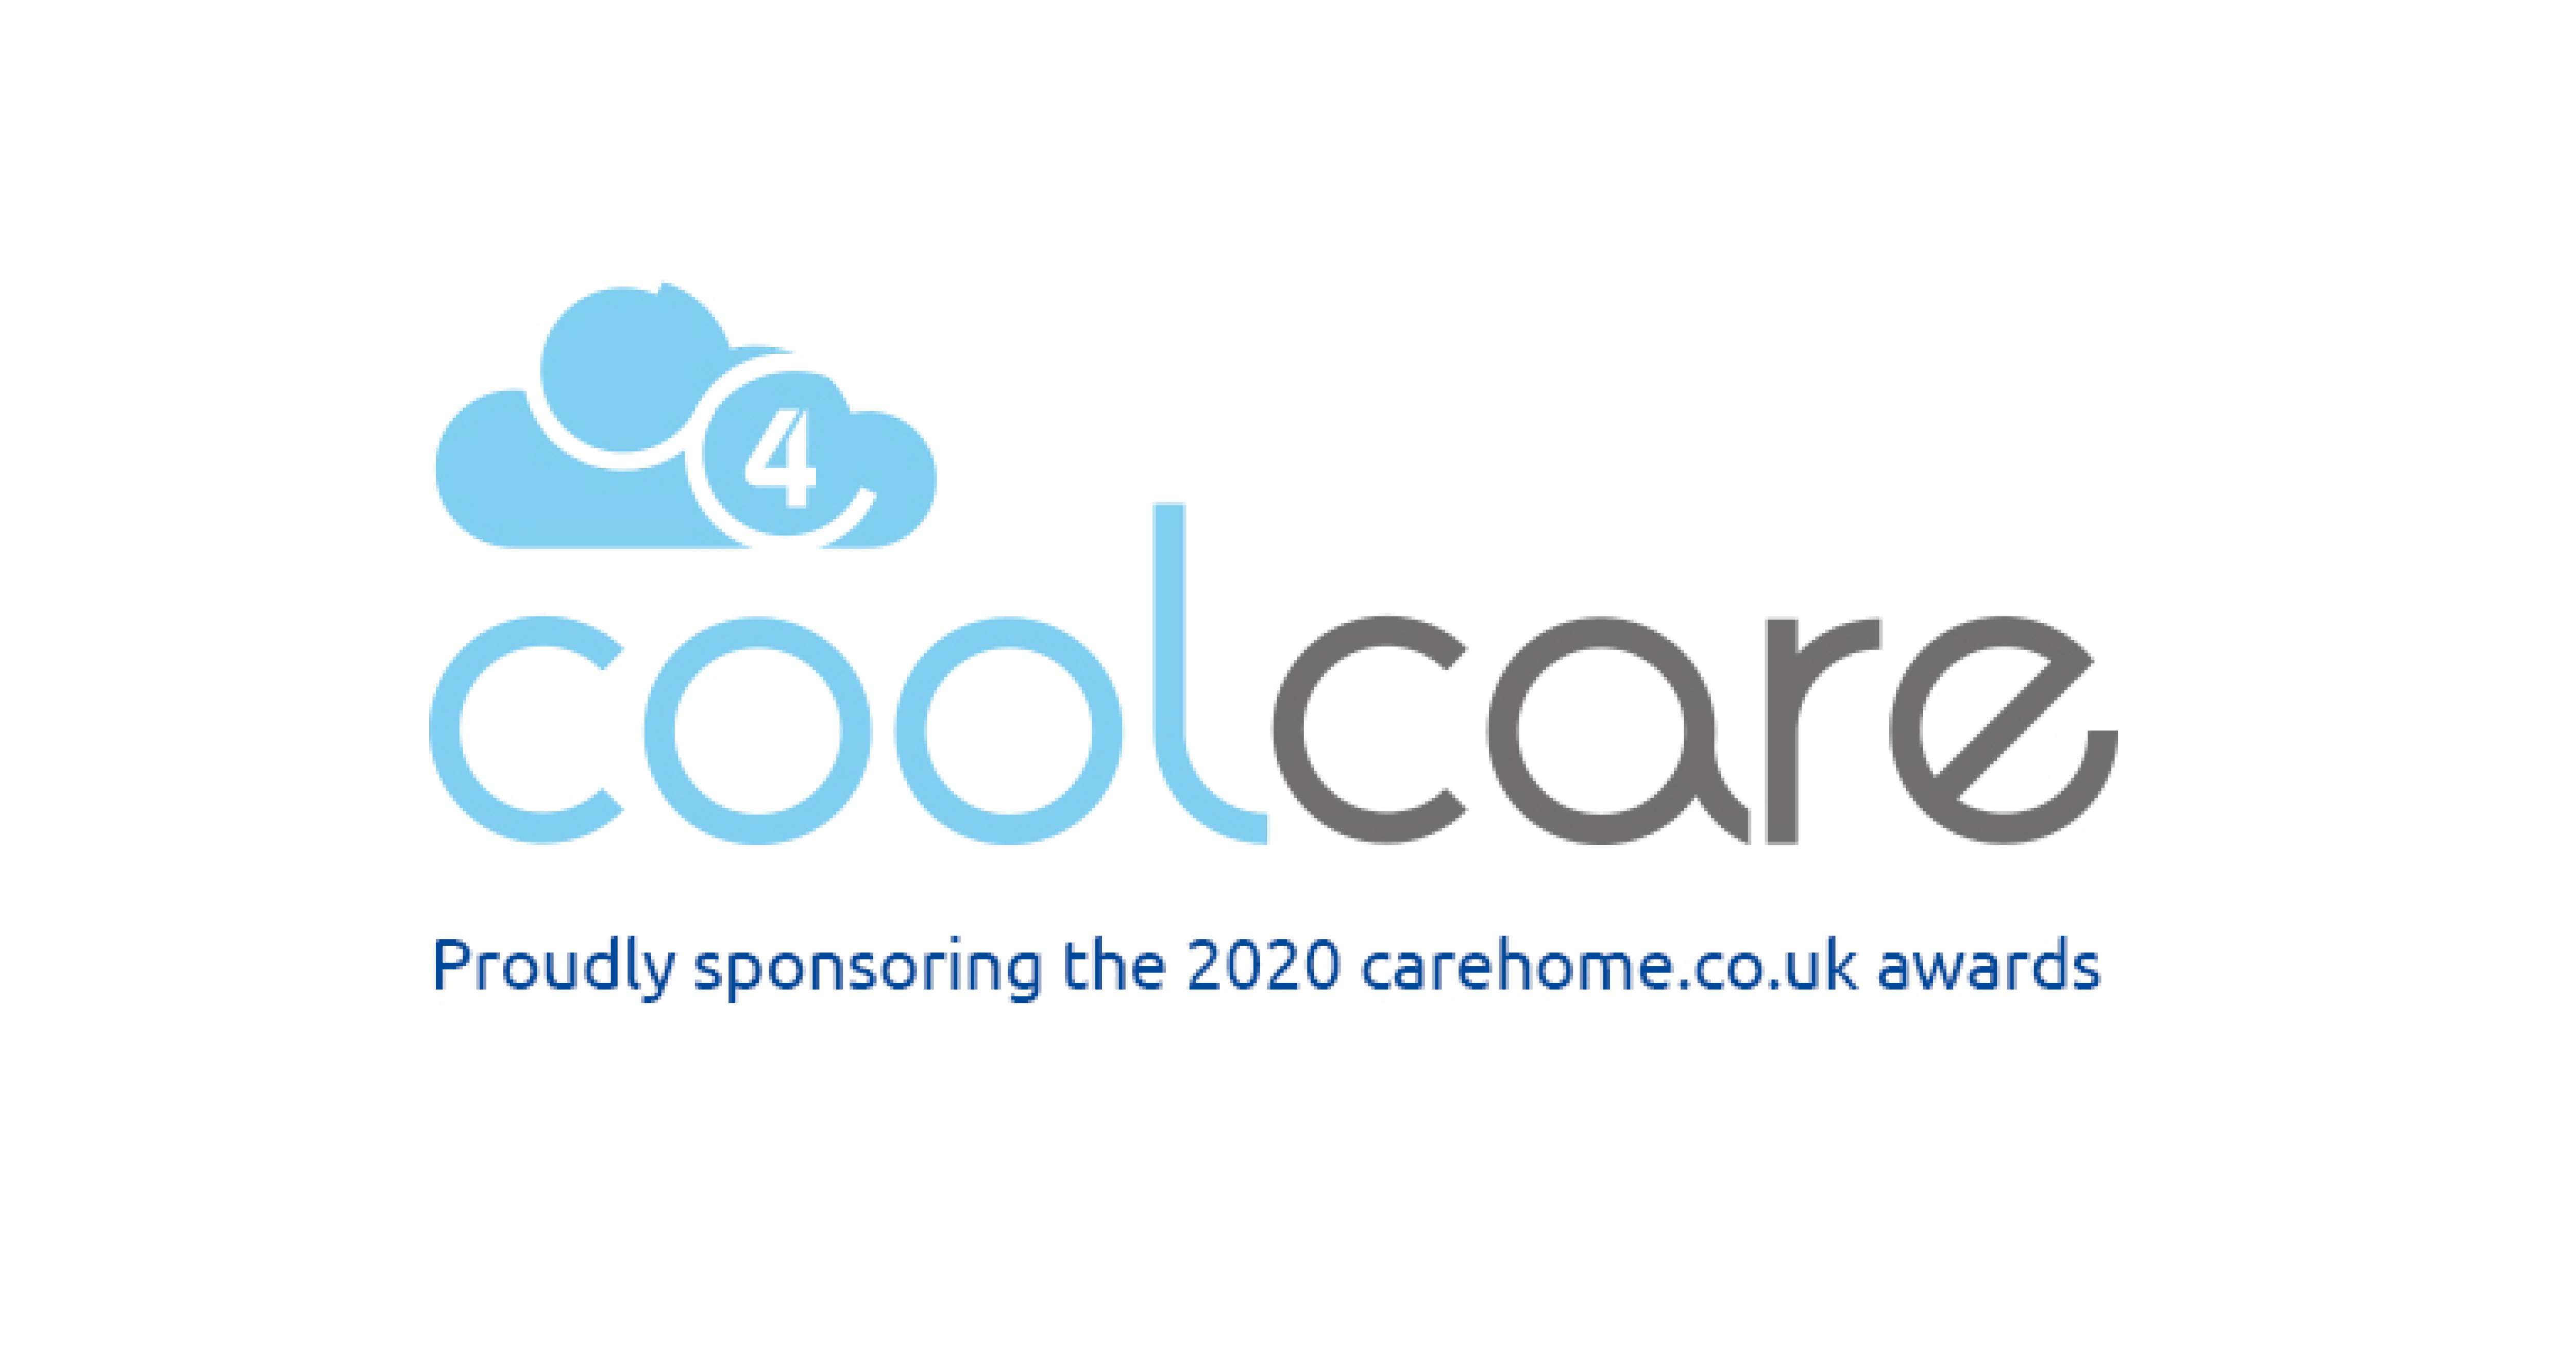 coolcare heralds new partnership with carehome.co.uk for the top 20 care homes 2020.